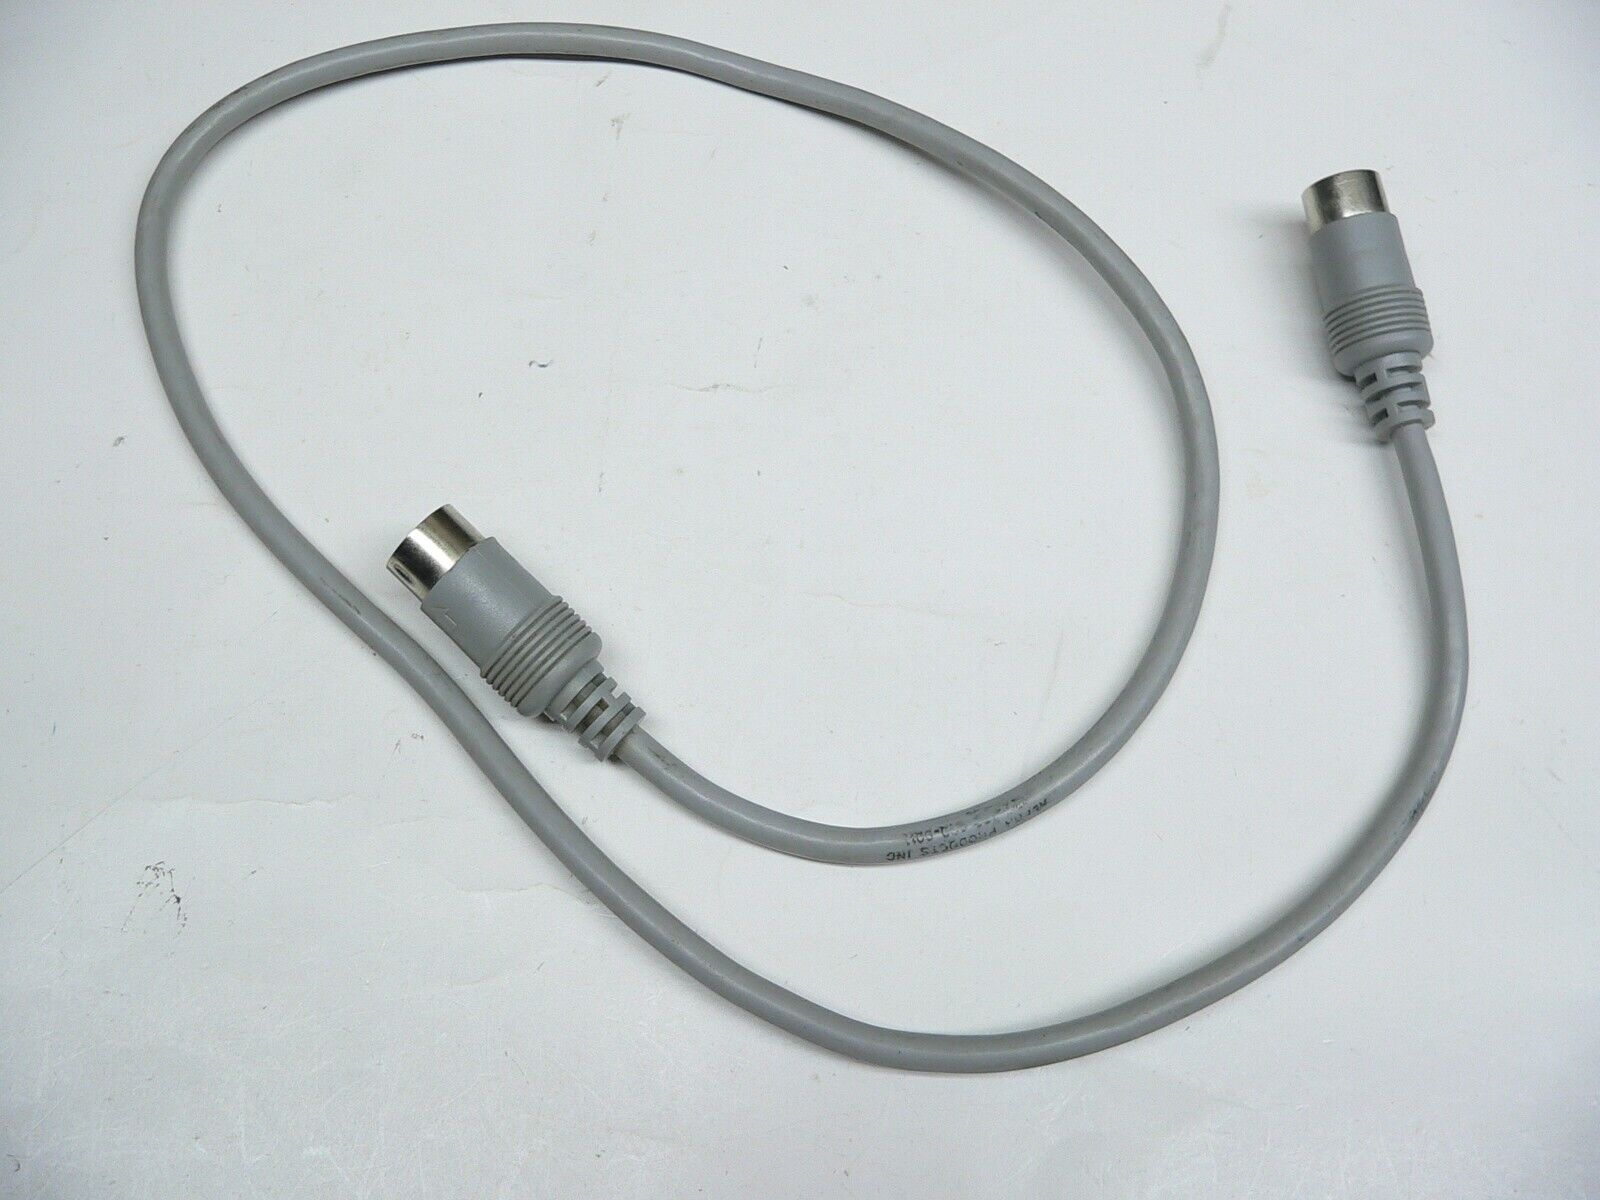 Vintage Atari ST External Floppy Disk Drive Cable    14 Pin DIN To 14 Pin DIN